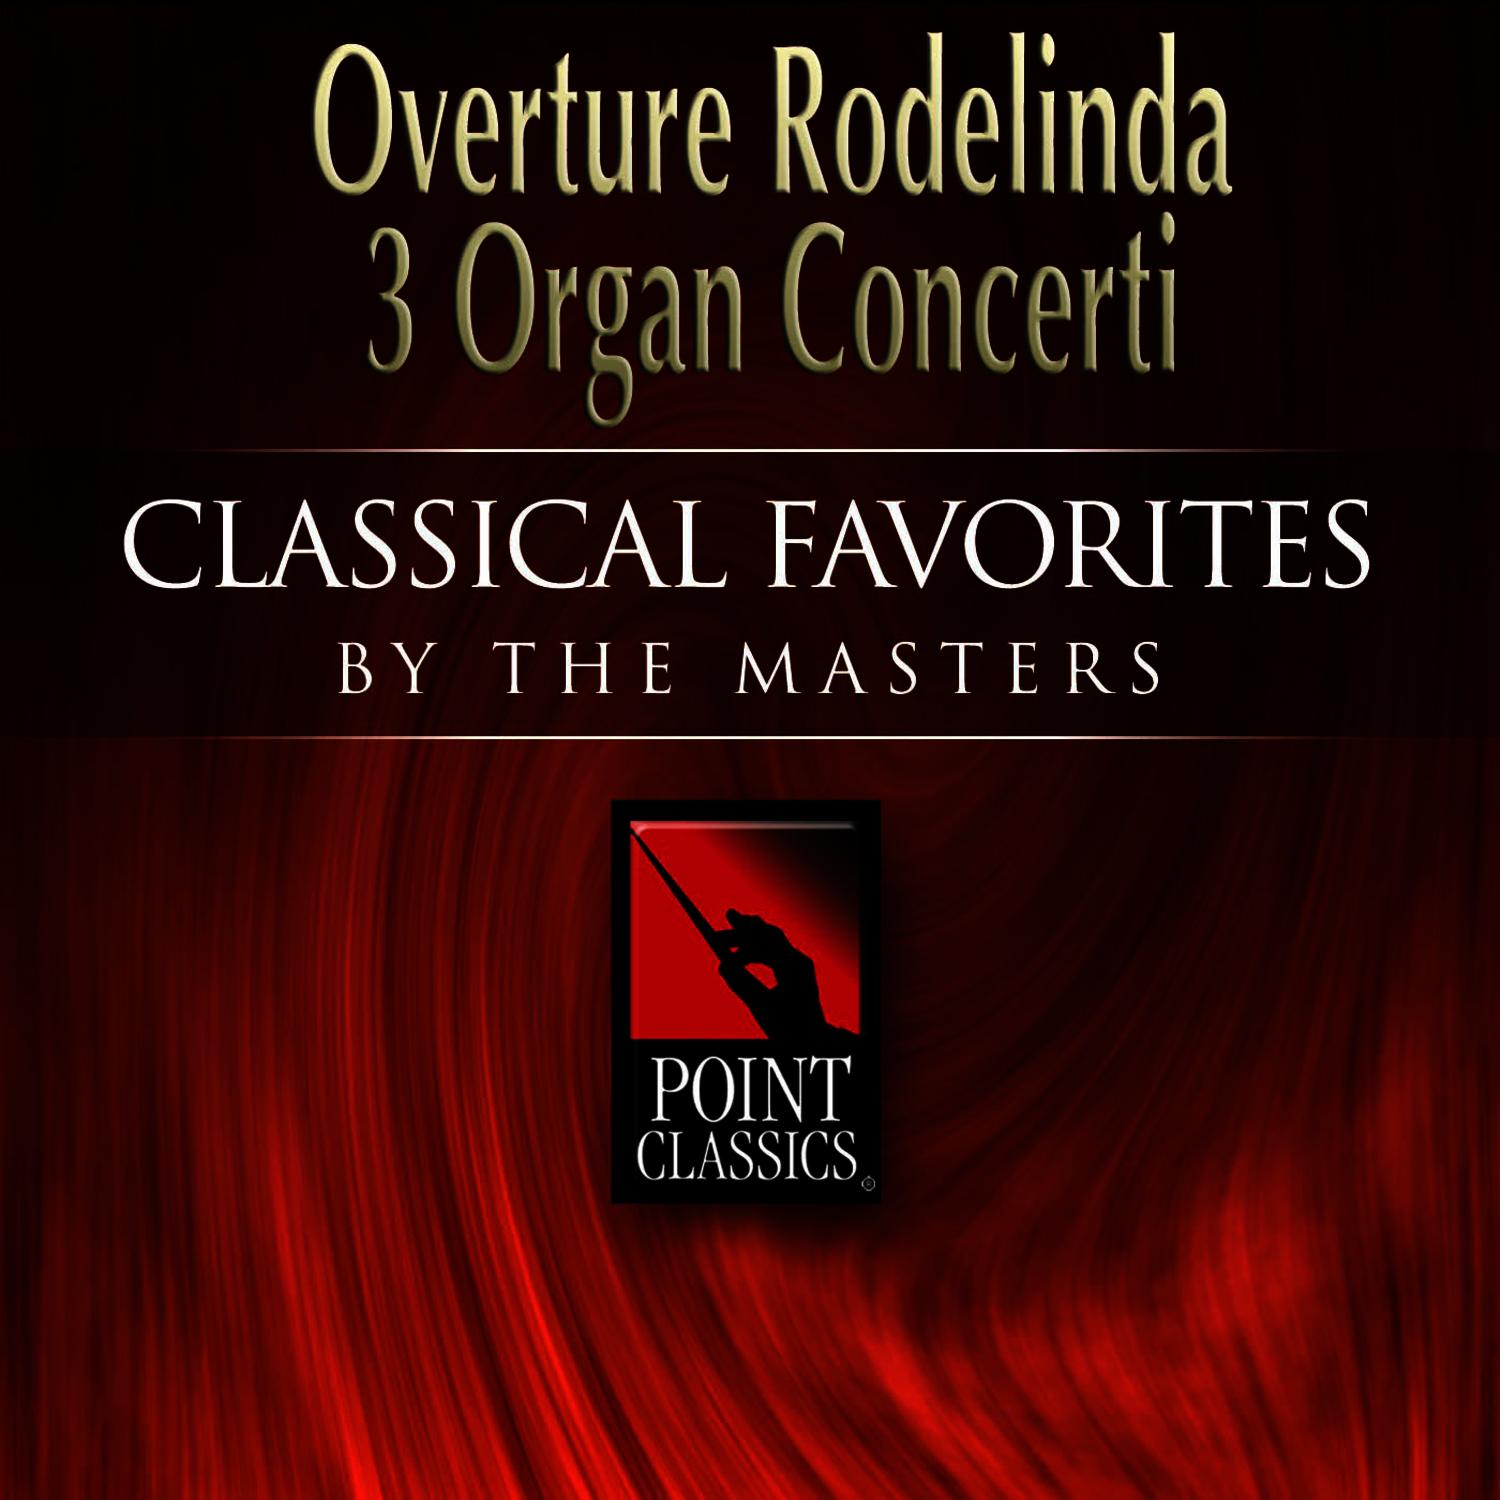 Concerto for Organ and Orchestra, No. 13 in F Major, Op. 4 The Cuckoo and the Nightingale : Larghetto